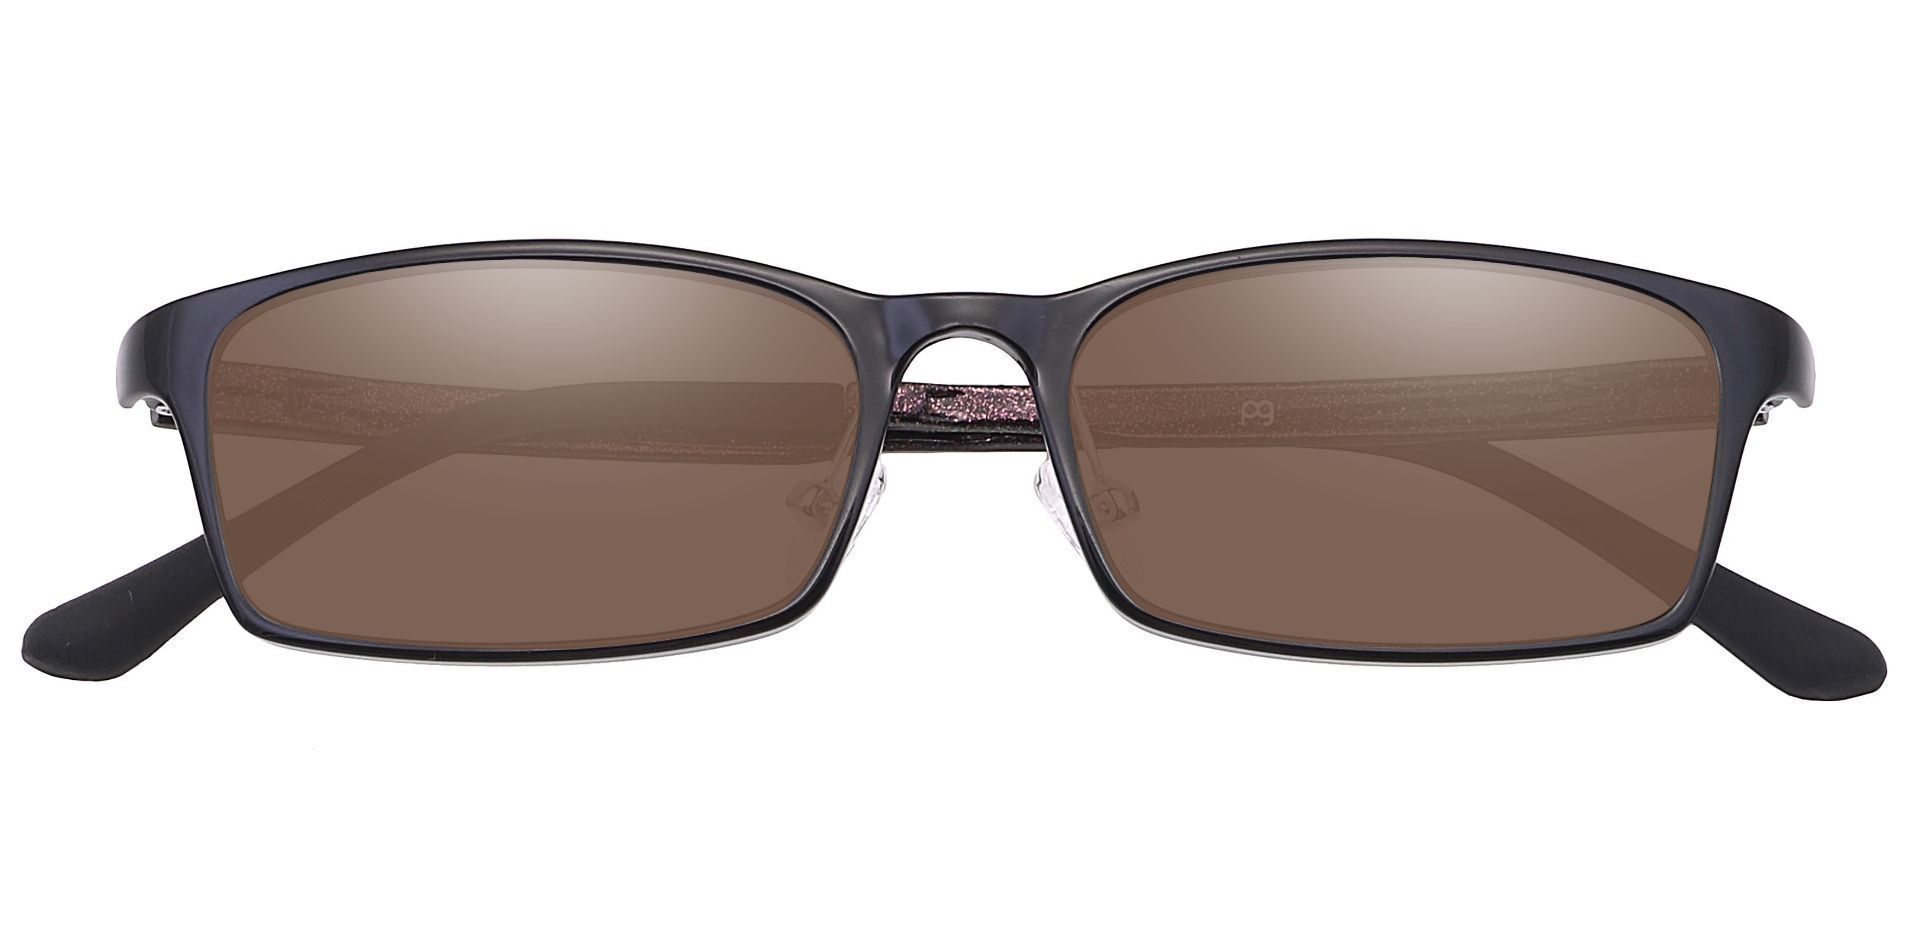 Hydra Rectangle Non-Rx Sunglasses -  Black Frame With Brown Lenses